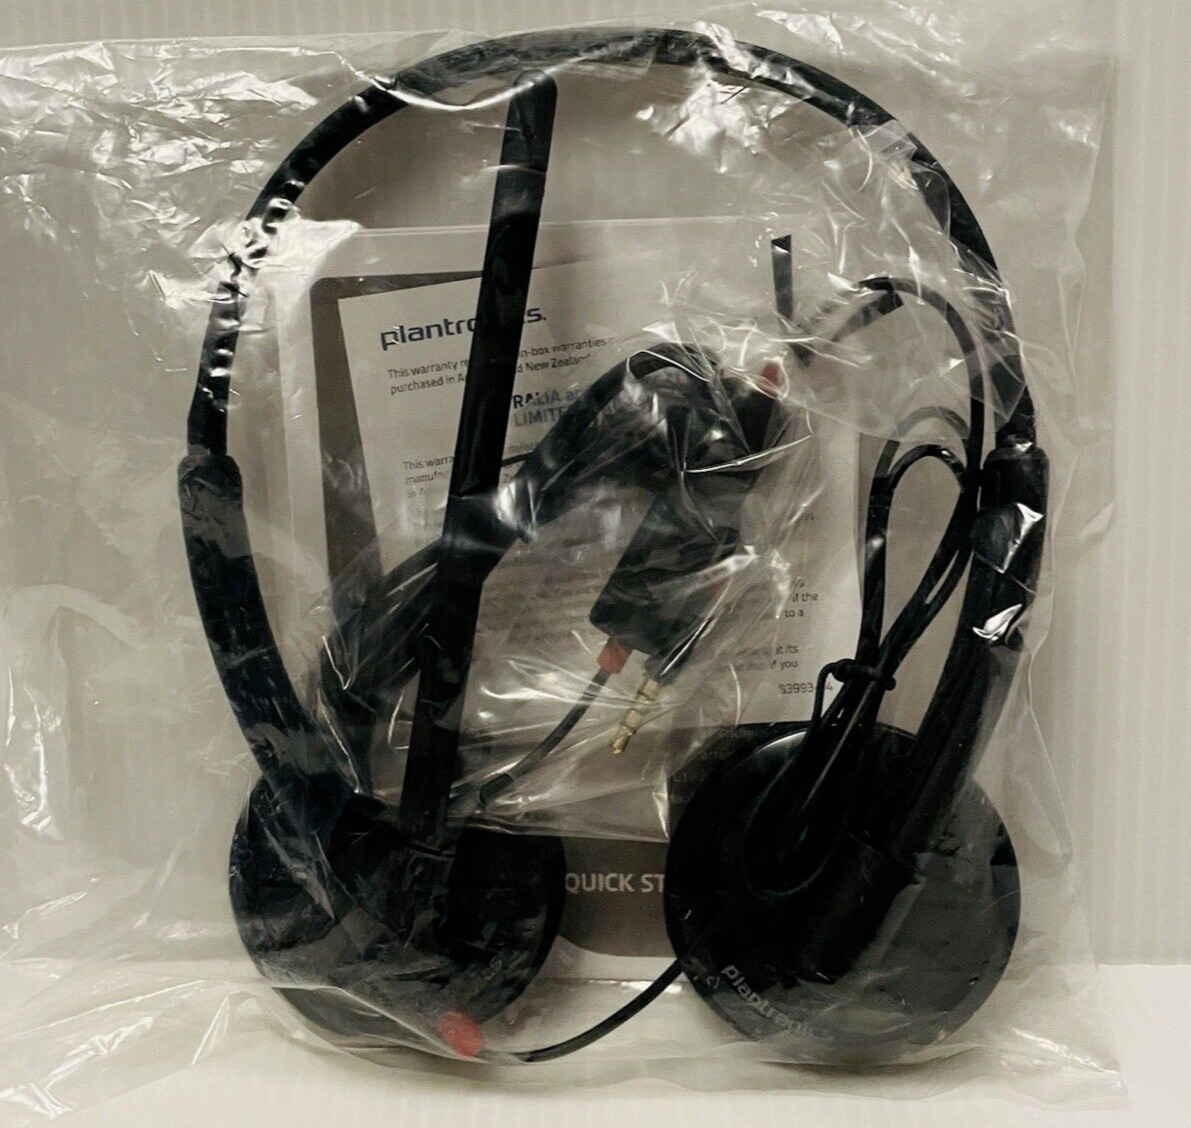 Plantronics 205204-02 Blackwire 225 Stereo Headset New and Sealed